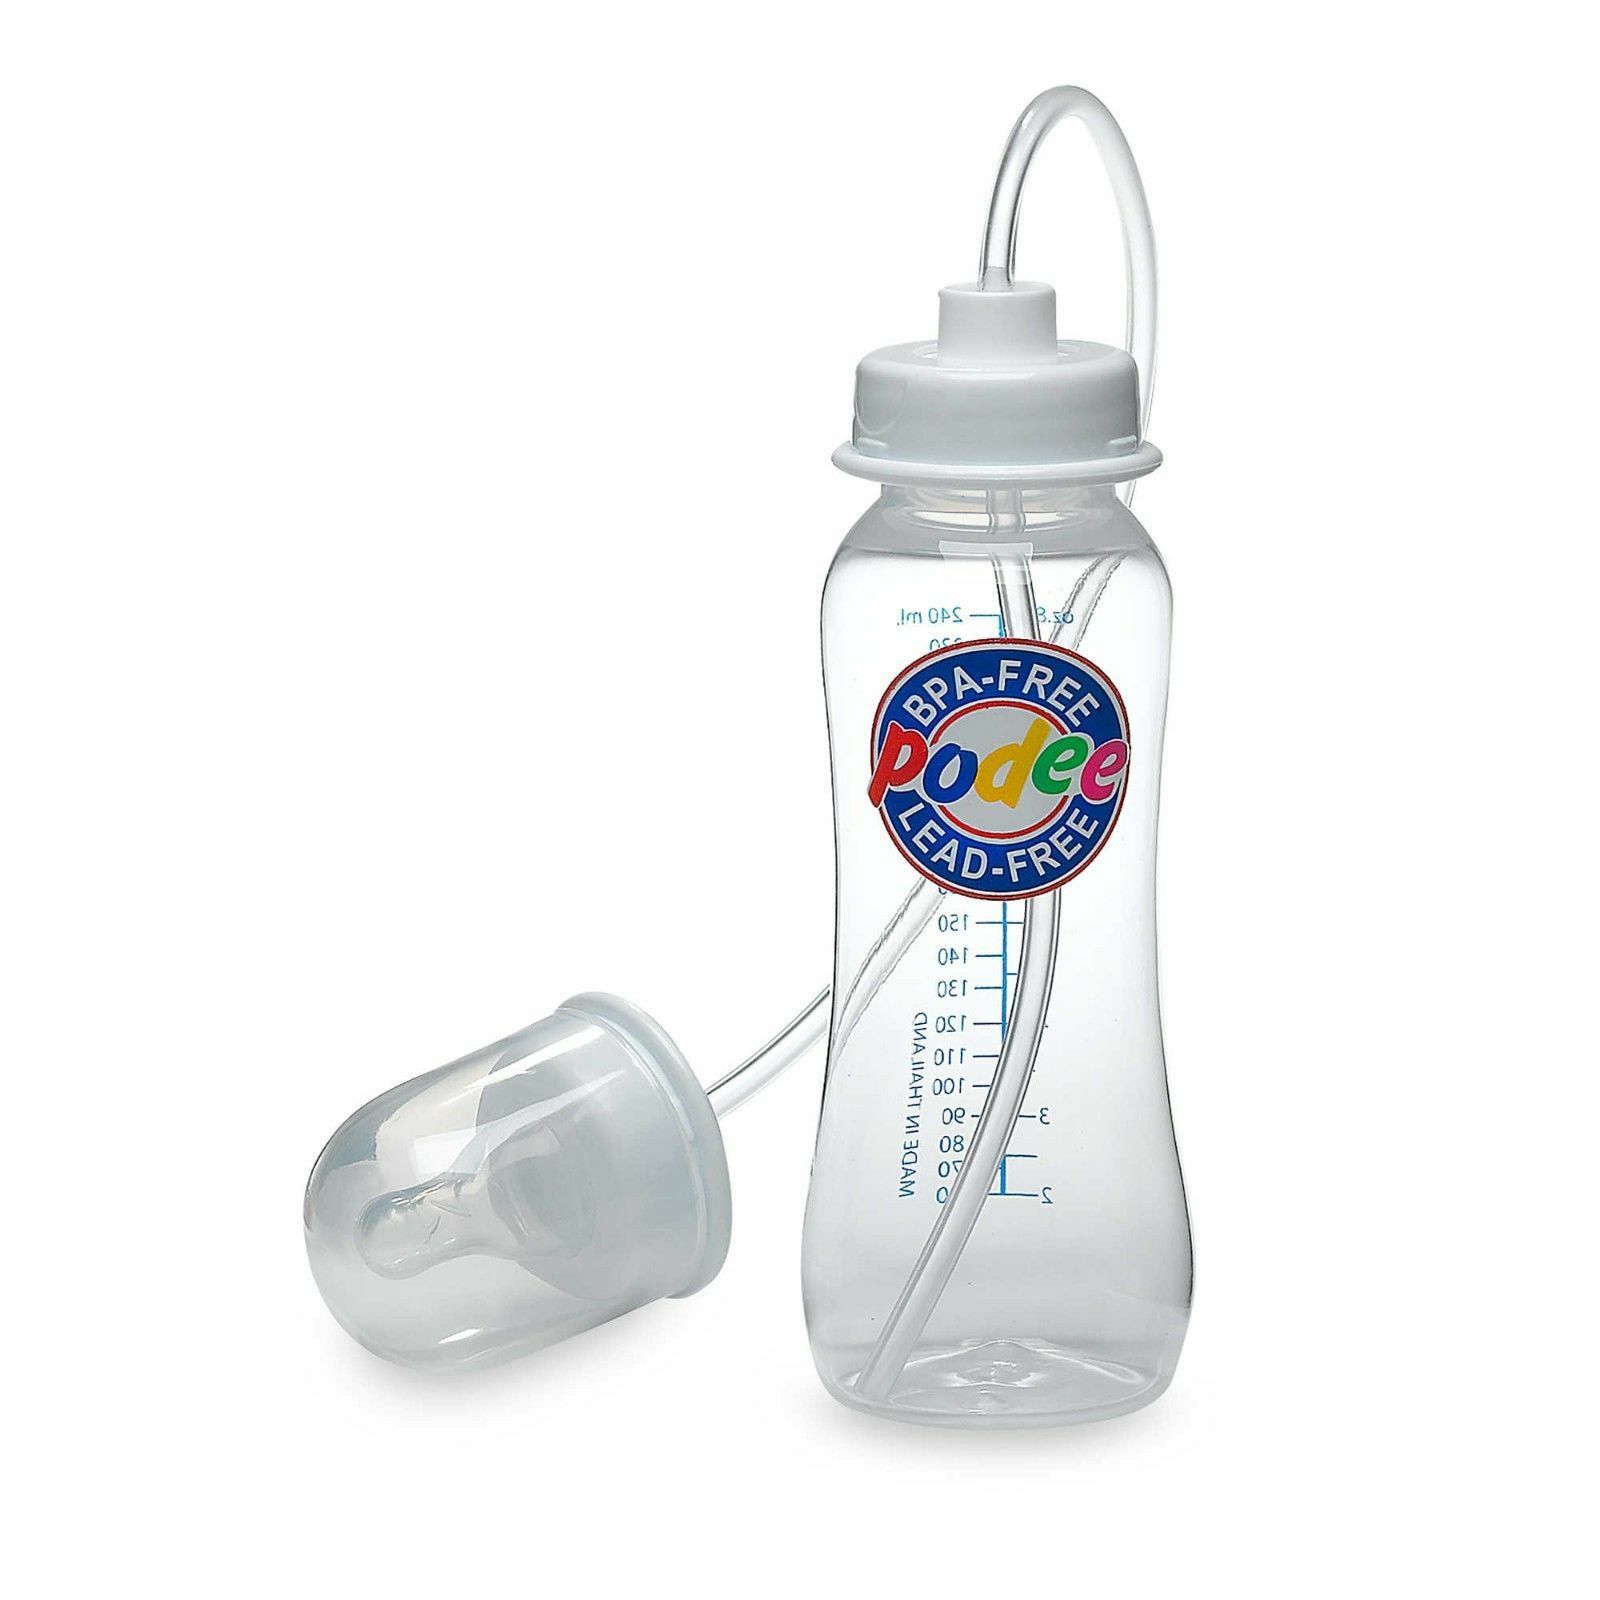 Brand New Podee Hands Free Baby Bottle Anti-colic System